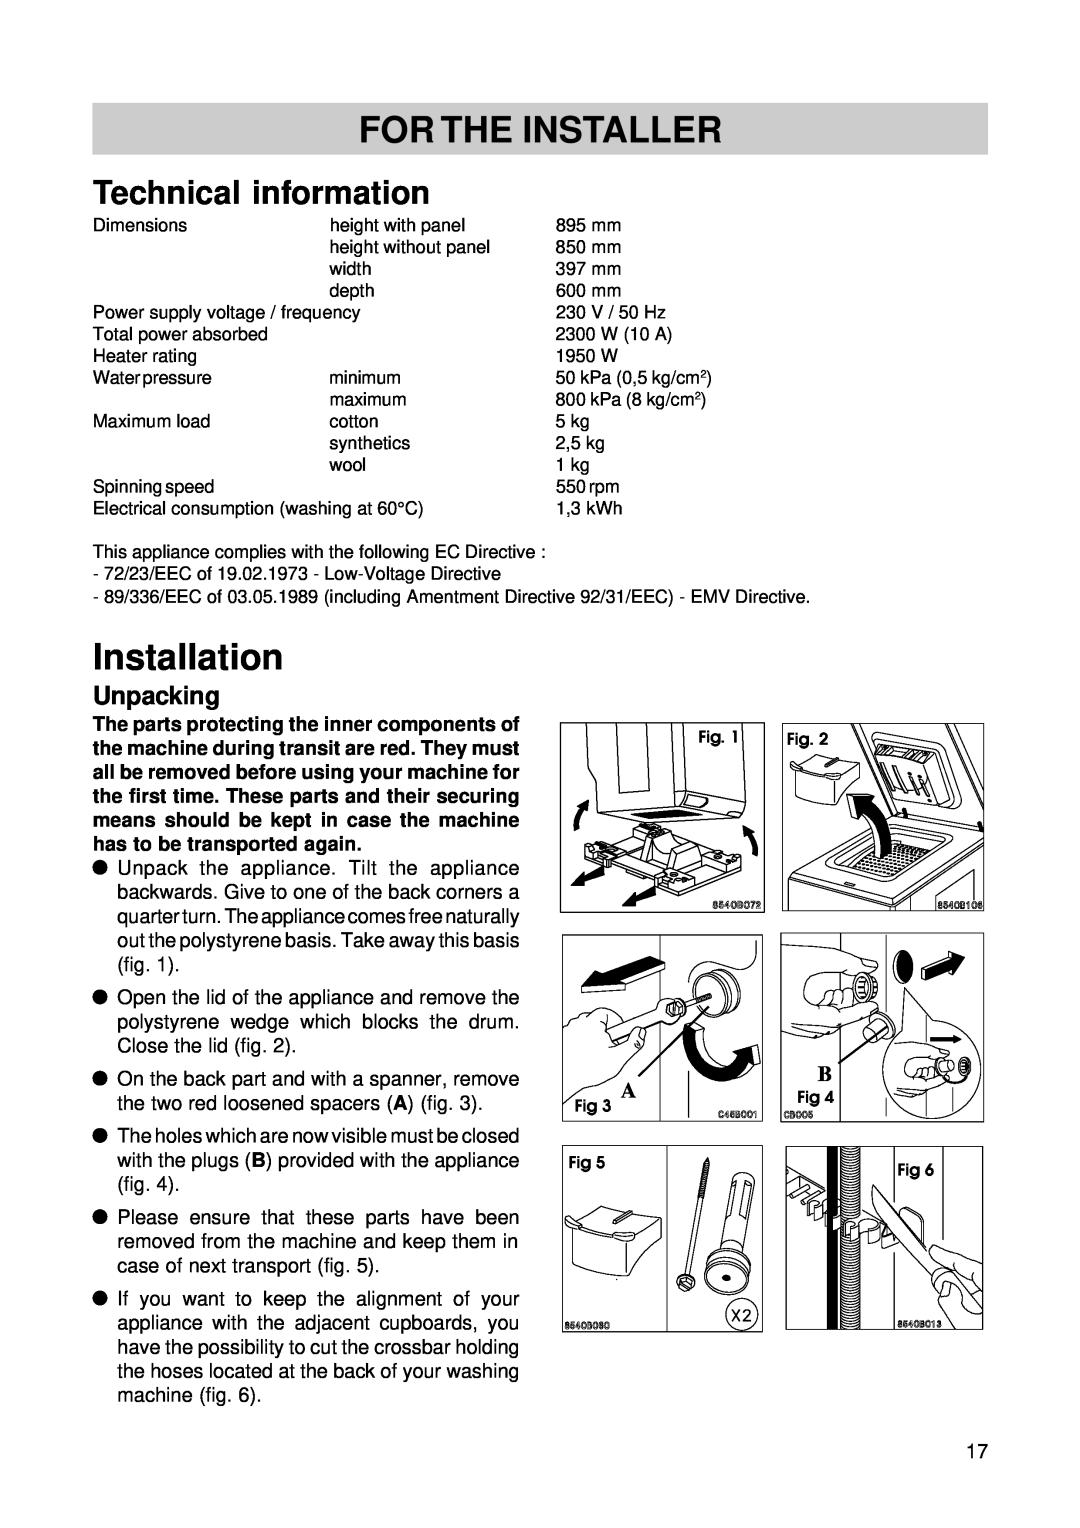 Zanussi TL 553 C manual For The Installer, Installation, Technical information, Unpacking 